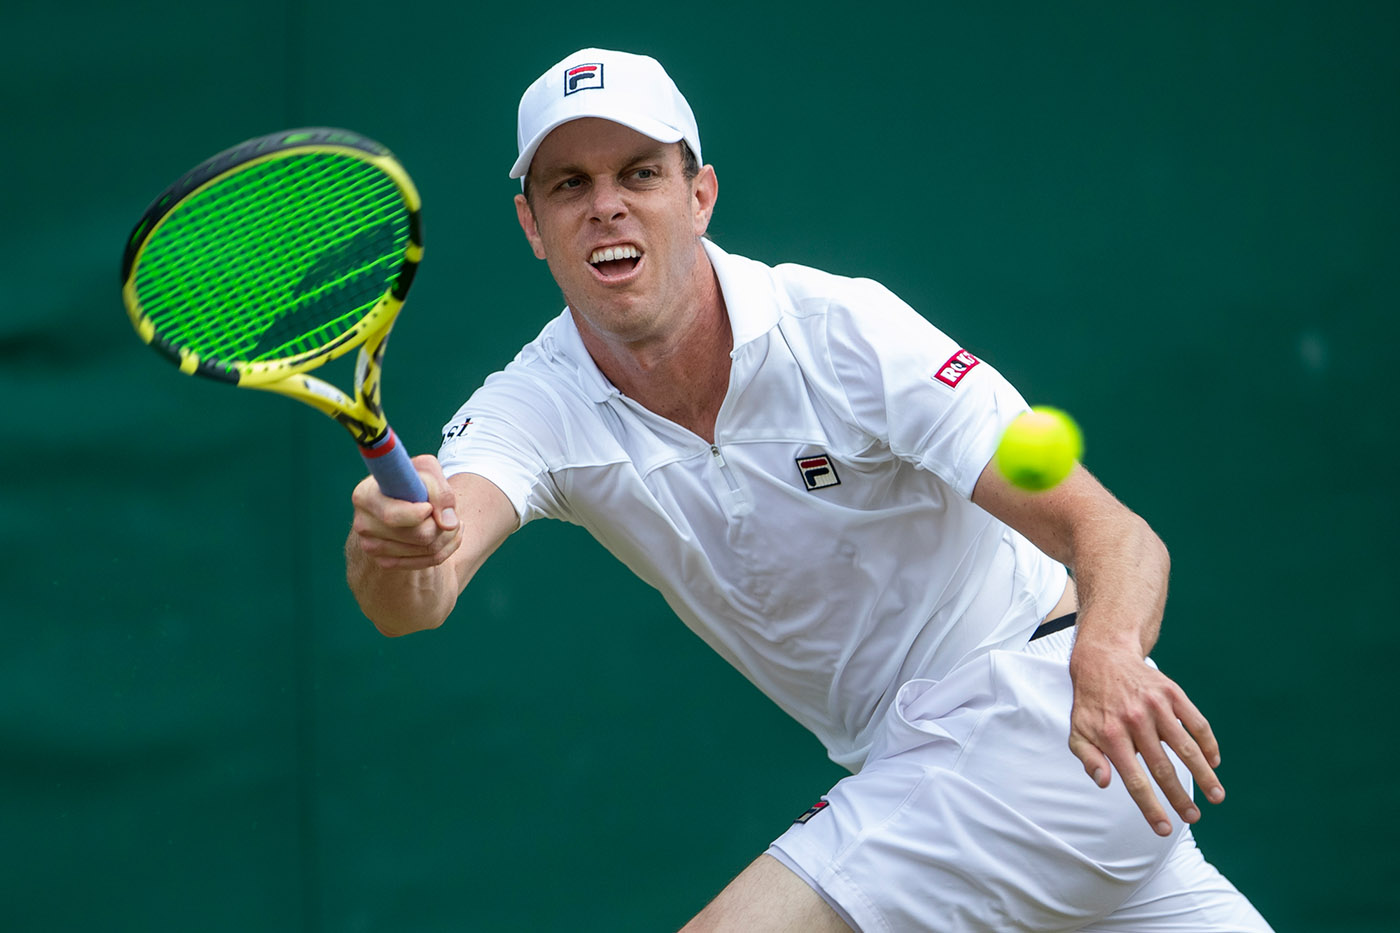 Hall of Fame Open LIVE: Andy Murray favourite against old foe Sam Querrey in first round at Hall of Fame Open -  Follow Muray vs Querrey LIVE updates